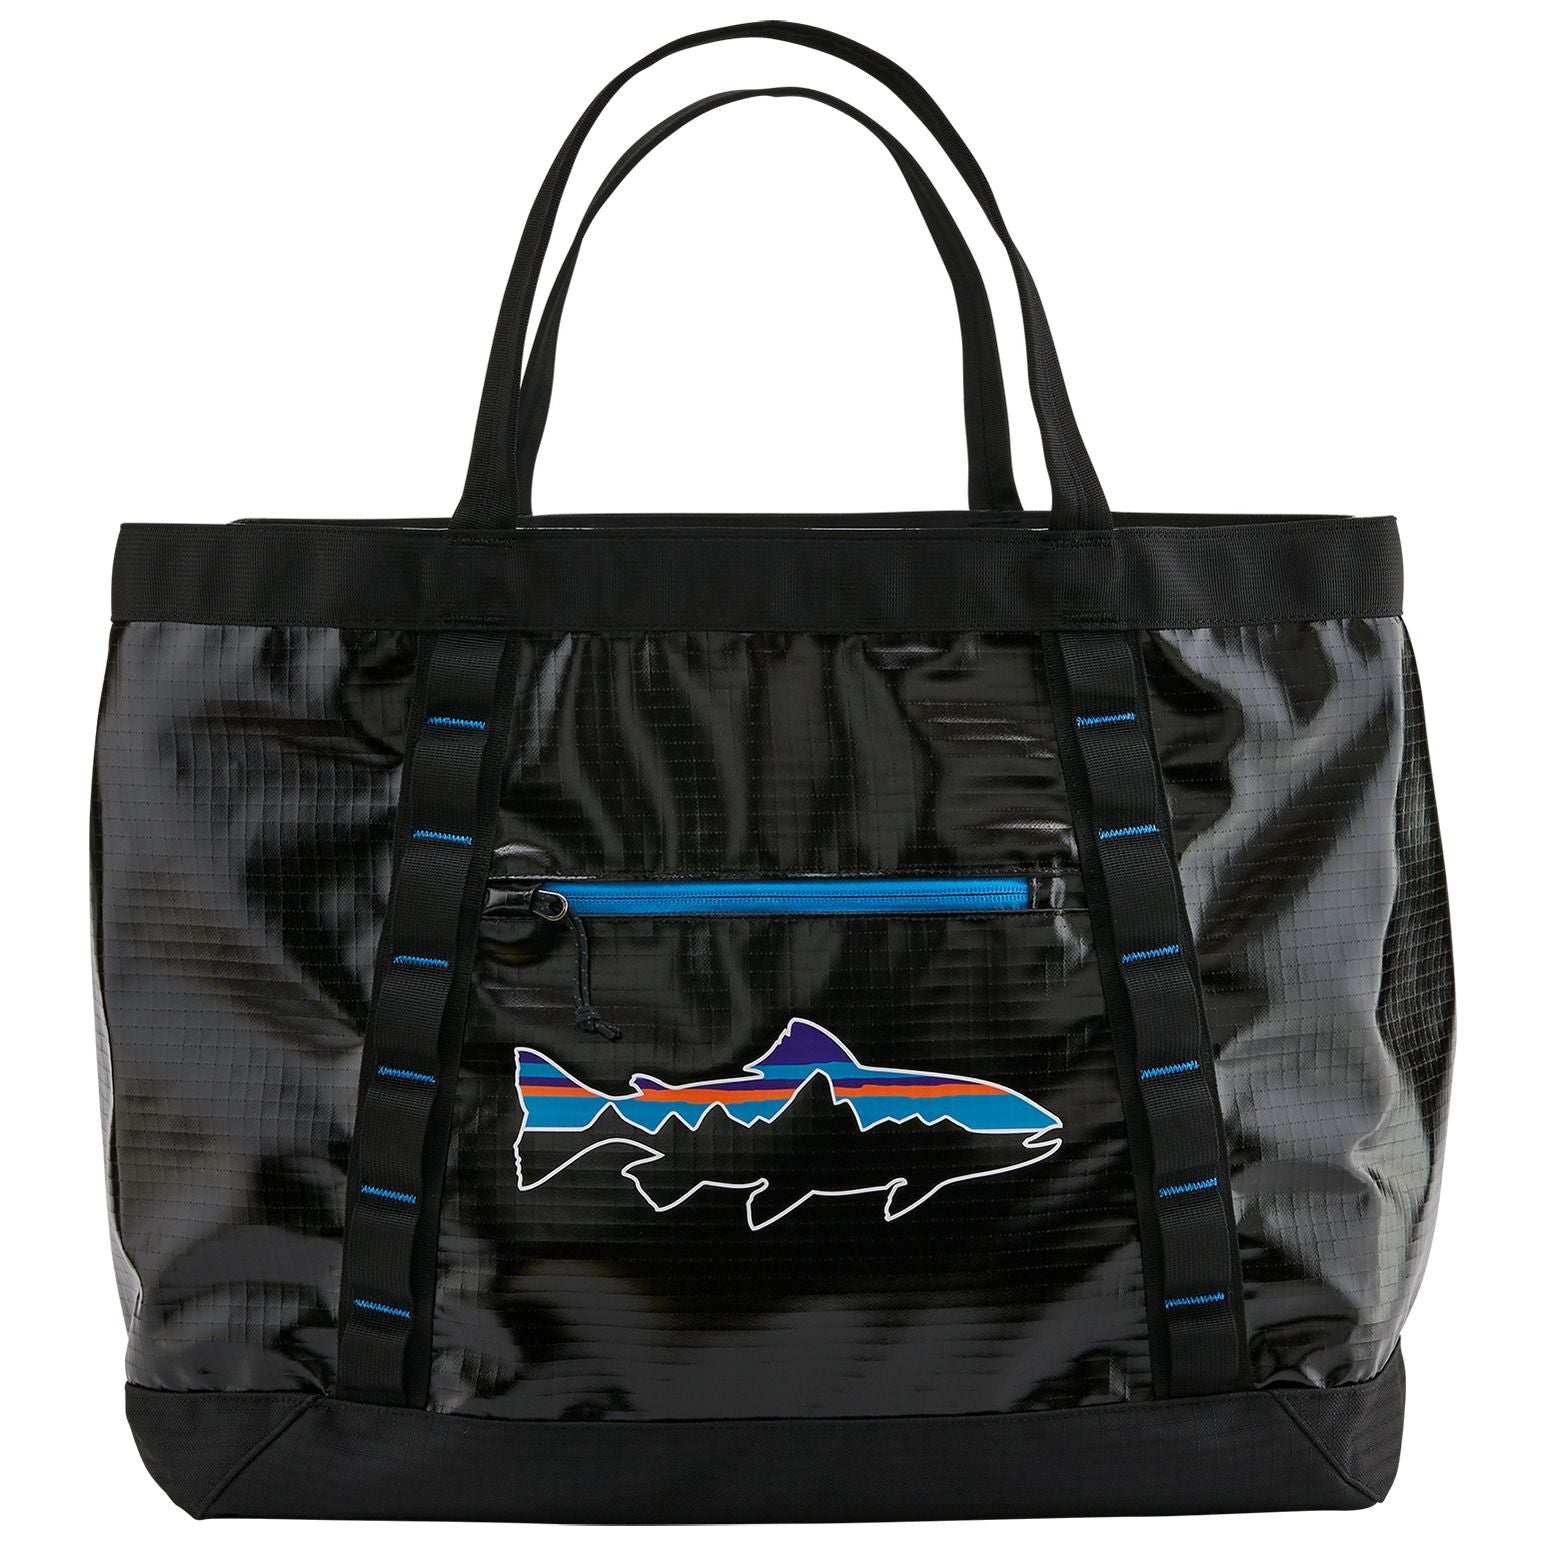 Patagonia Black Hole Gear Tote Black w/Fitz Trout Image 01